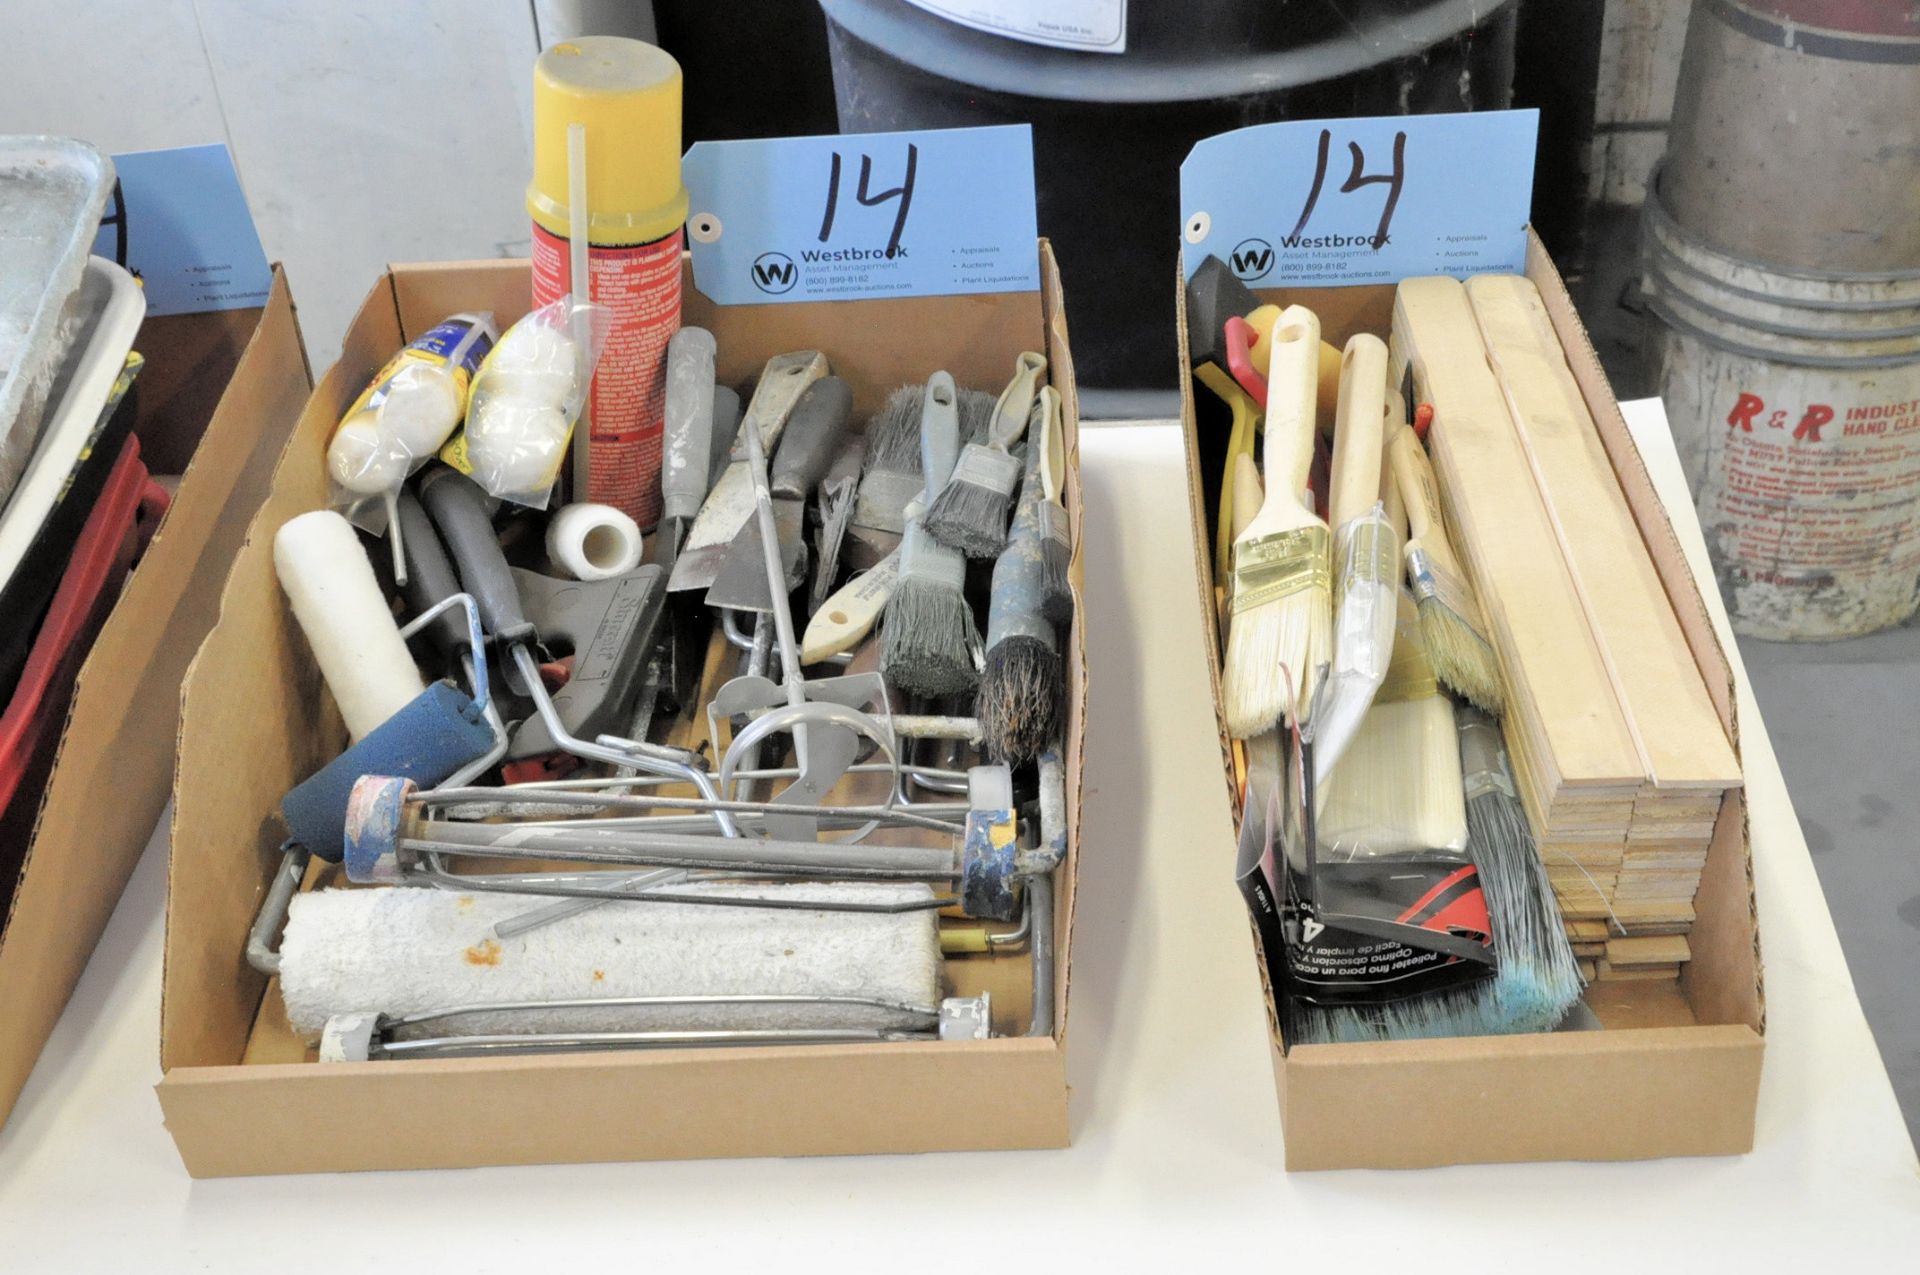 Lot-Paint Roller Trays, Paint Rollers, Brushes, Stir Sticks, Tarps and Rags in (3) Boxes & on Floor - Image 2 of 3